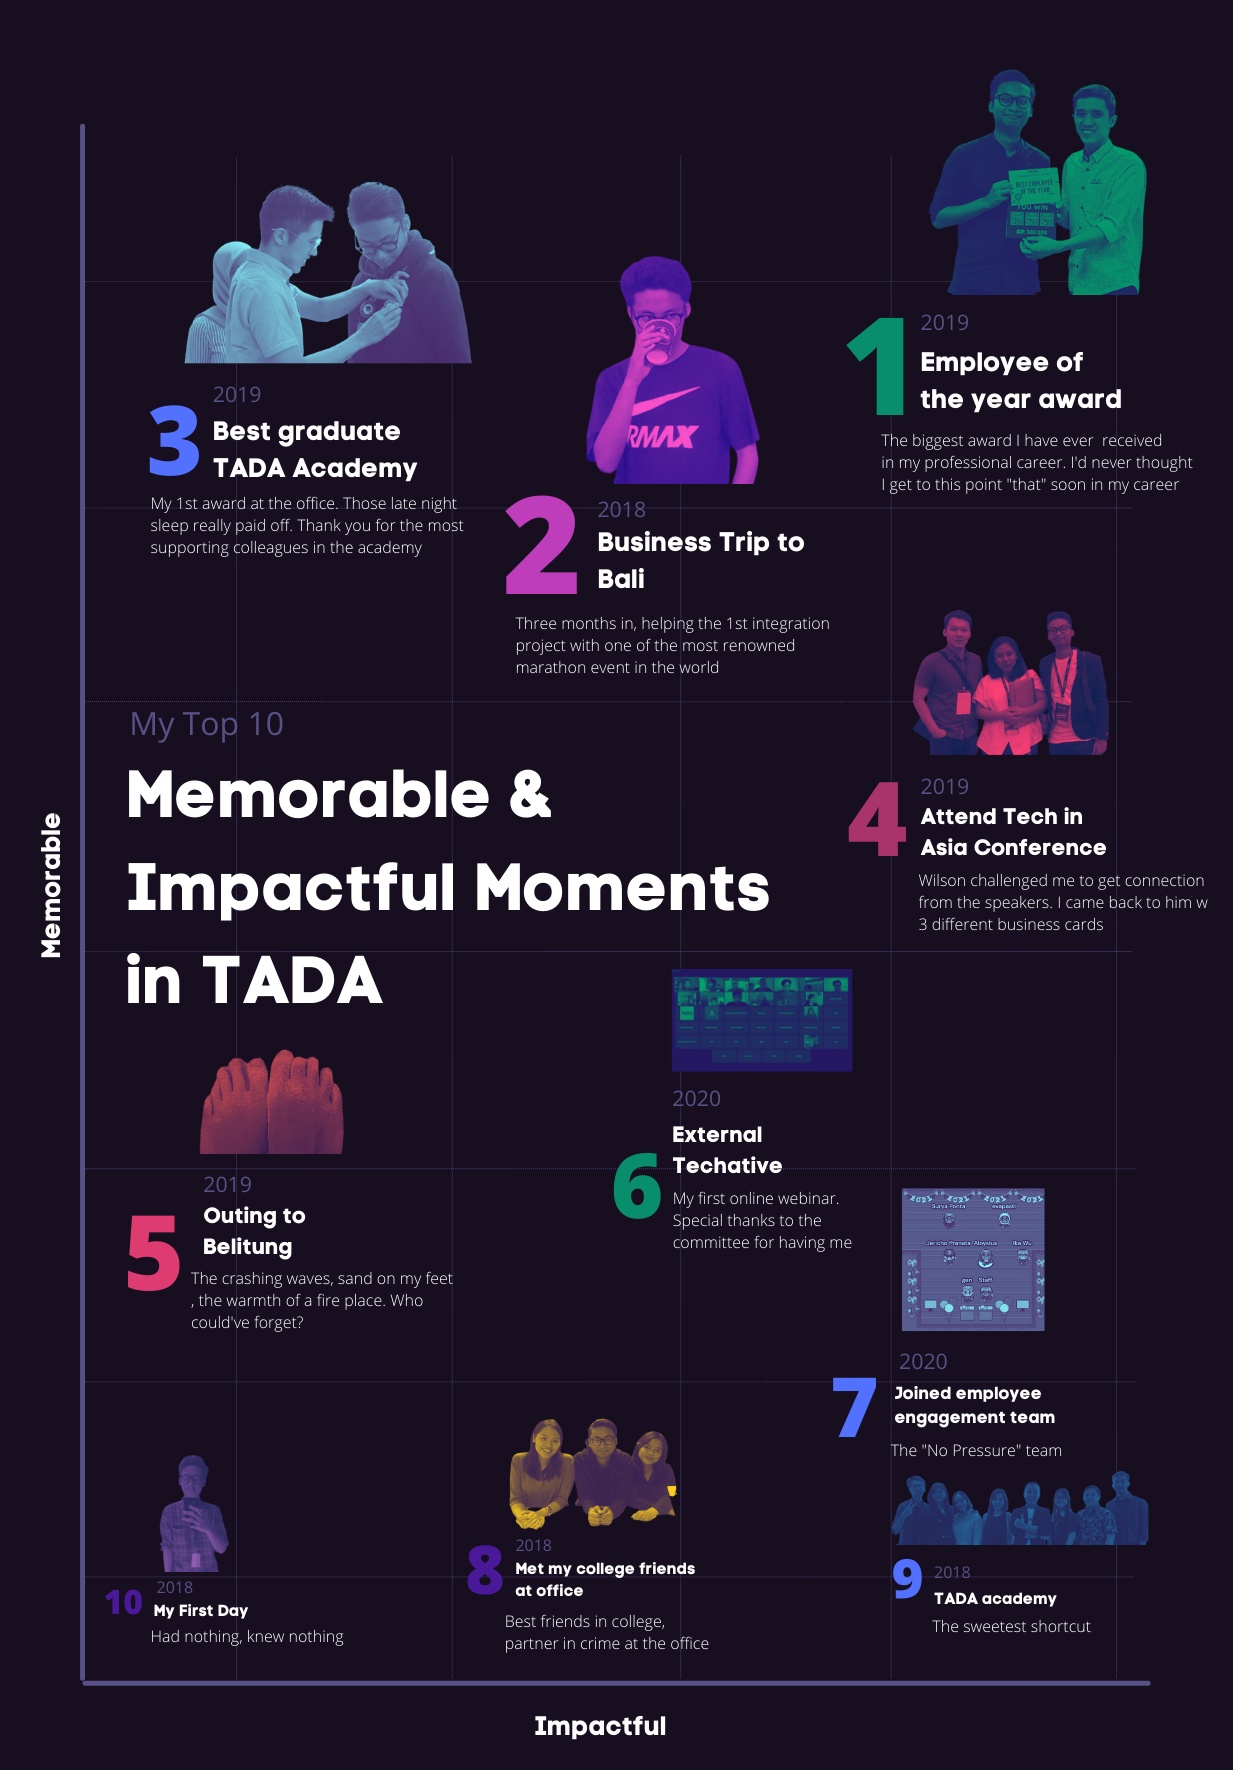 My Top 10 Moments While Working at TADA